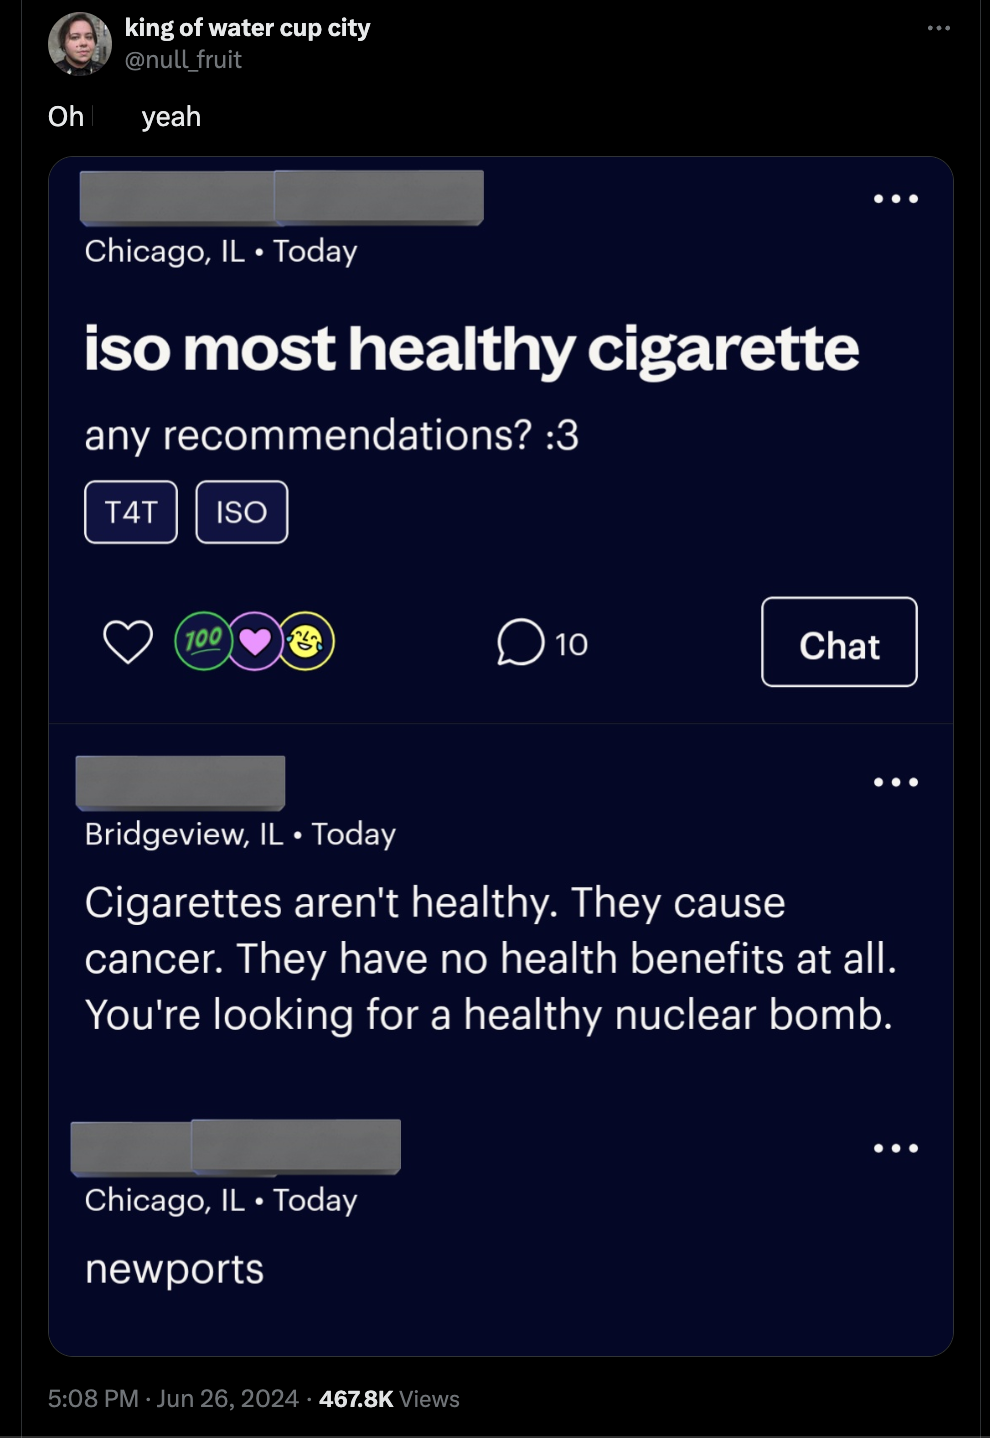 screenshot - king of water cup city fruit Oh yeah Chicago, Il Today iso most healthy cigarette any recommendations? 3 T4T Iso 10 Chat Bridgeview, Il. Today Cigarettes aren't healthy. They cause cancer. They have no health benefits at all. You're looking f